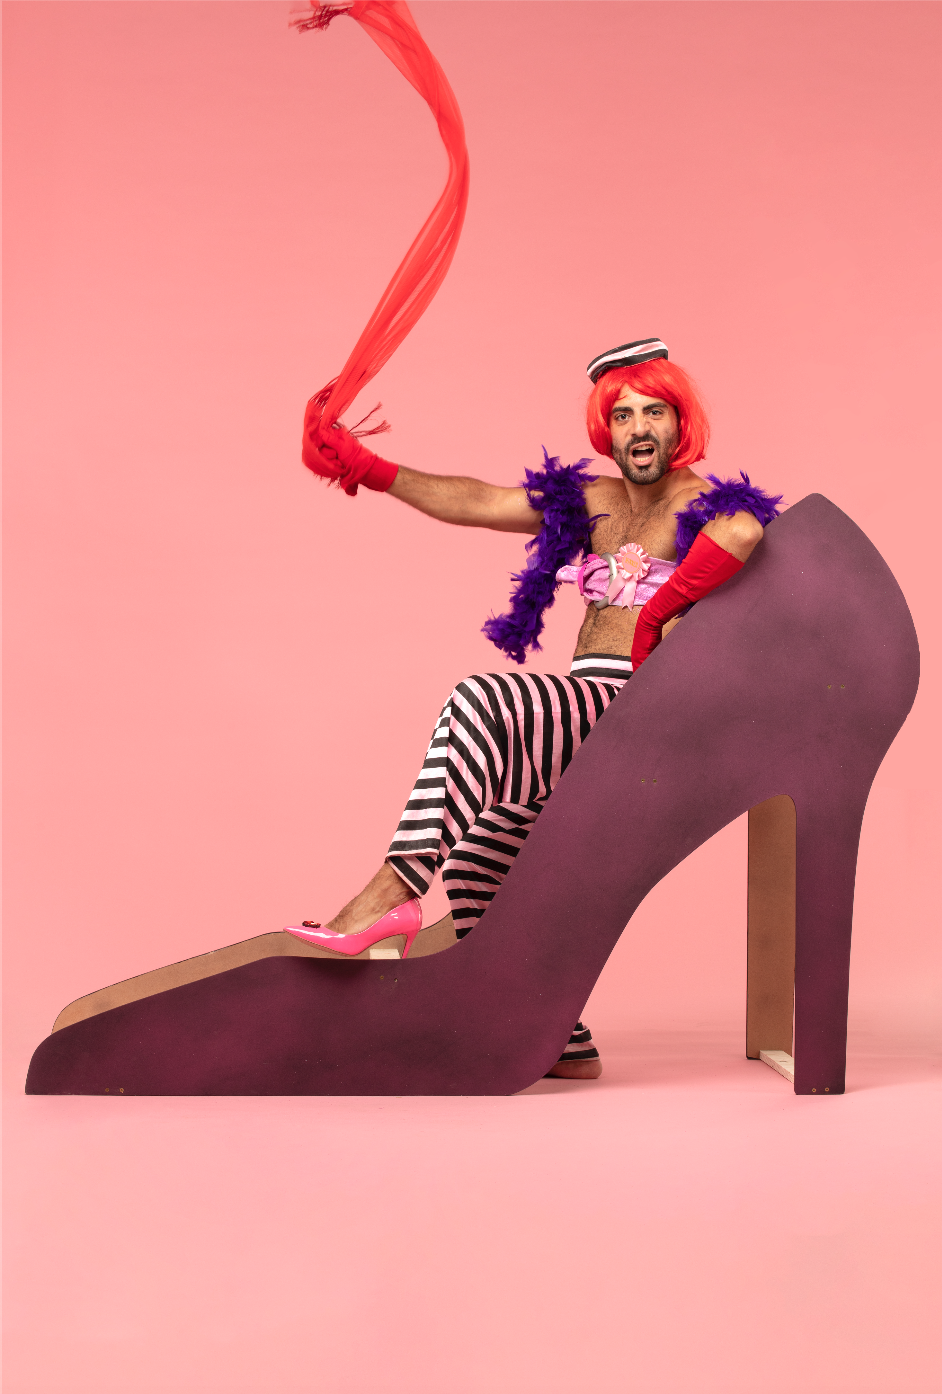 Man with feather boa sitting in giant shoe